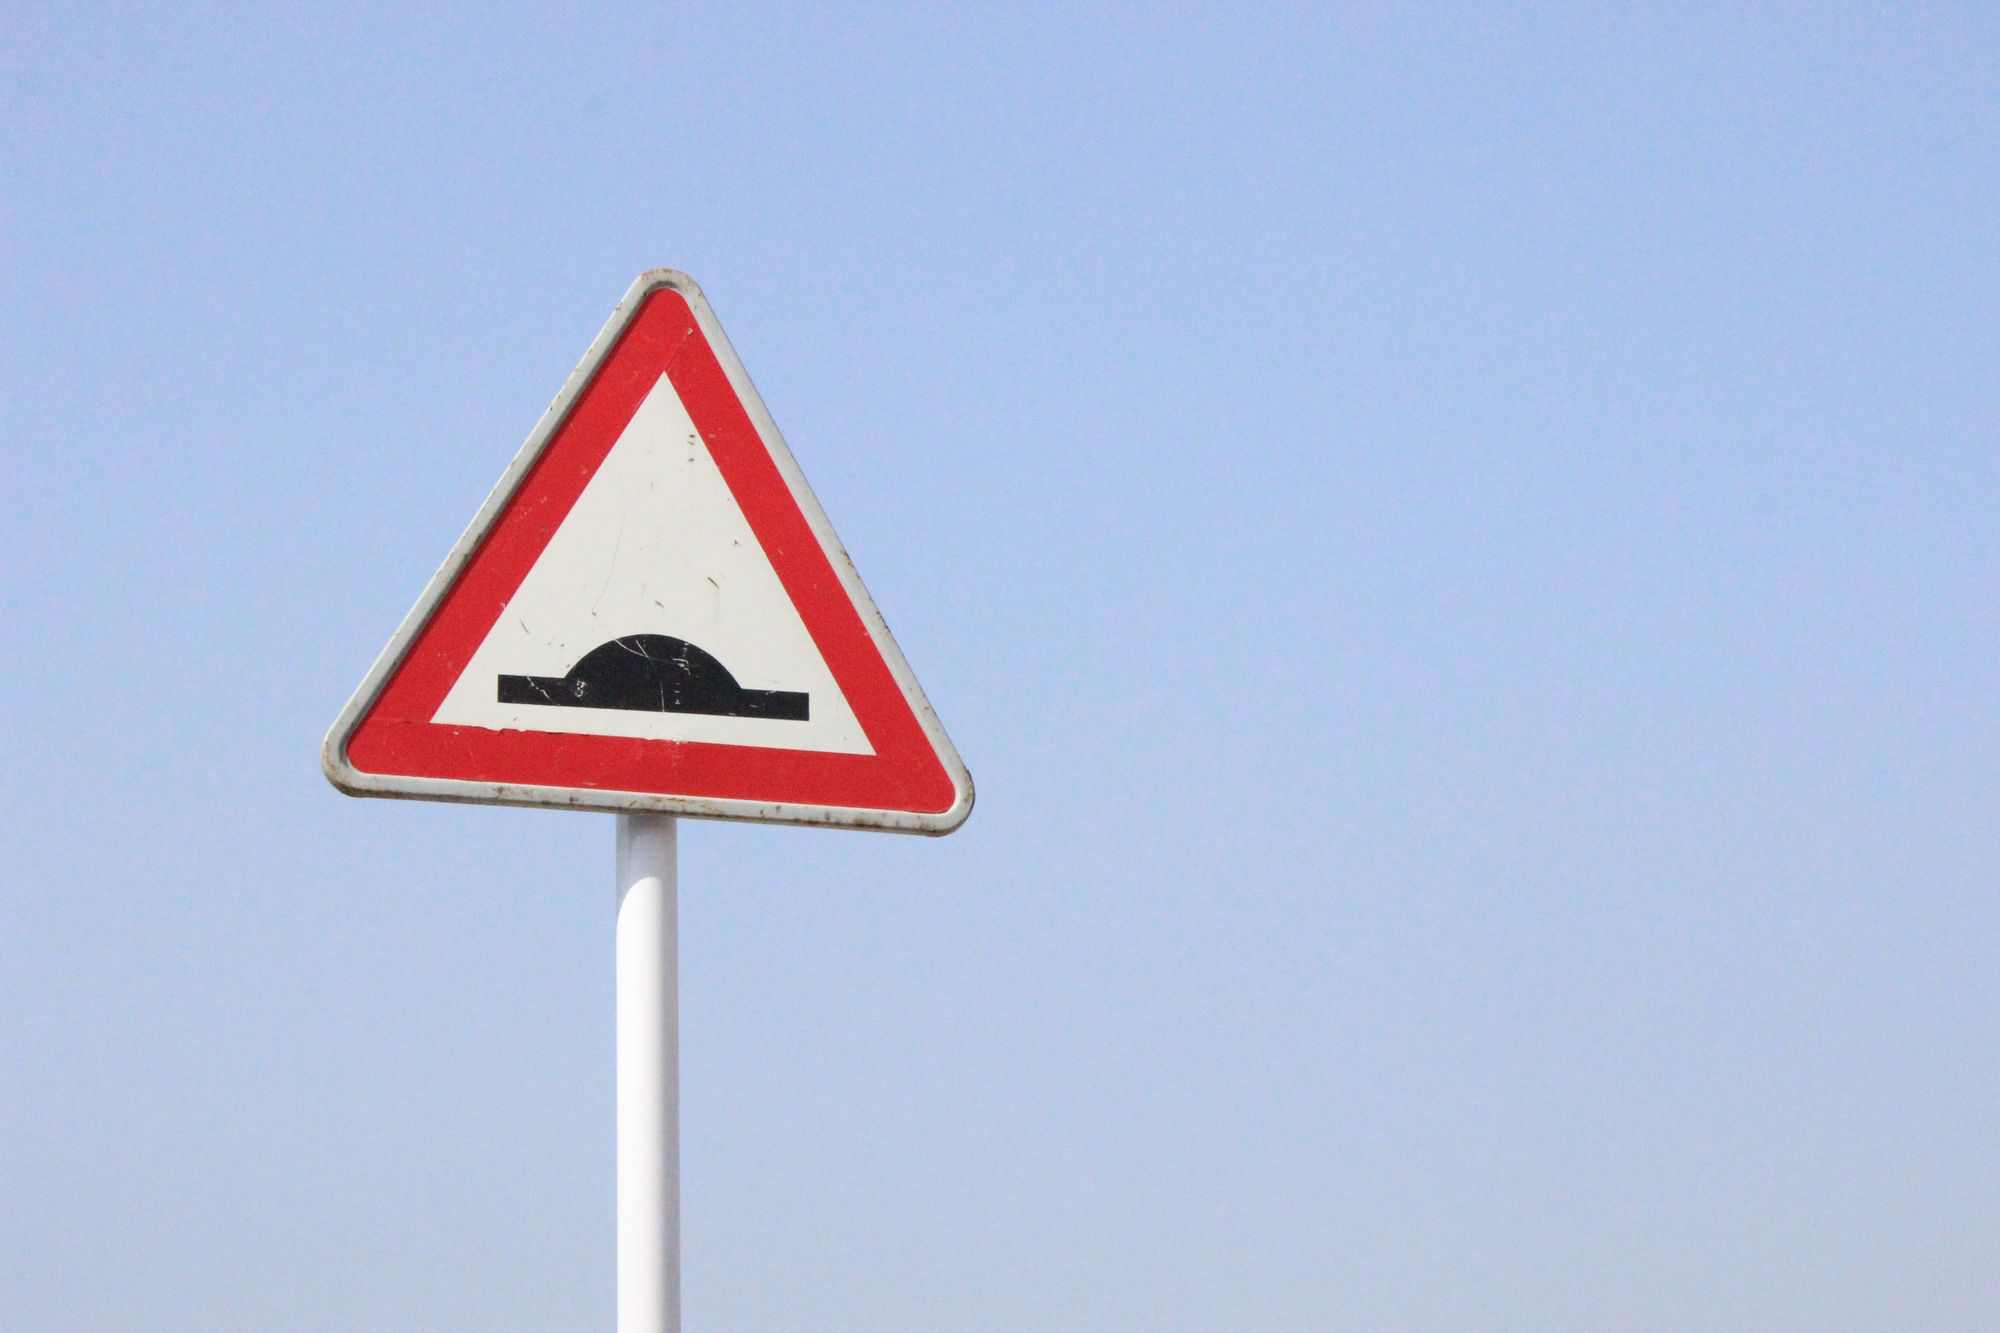 Road sign with a the symbol for a hump in the road against a blue sky.